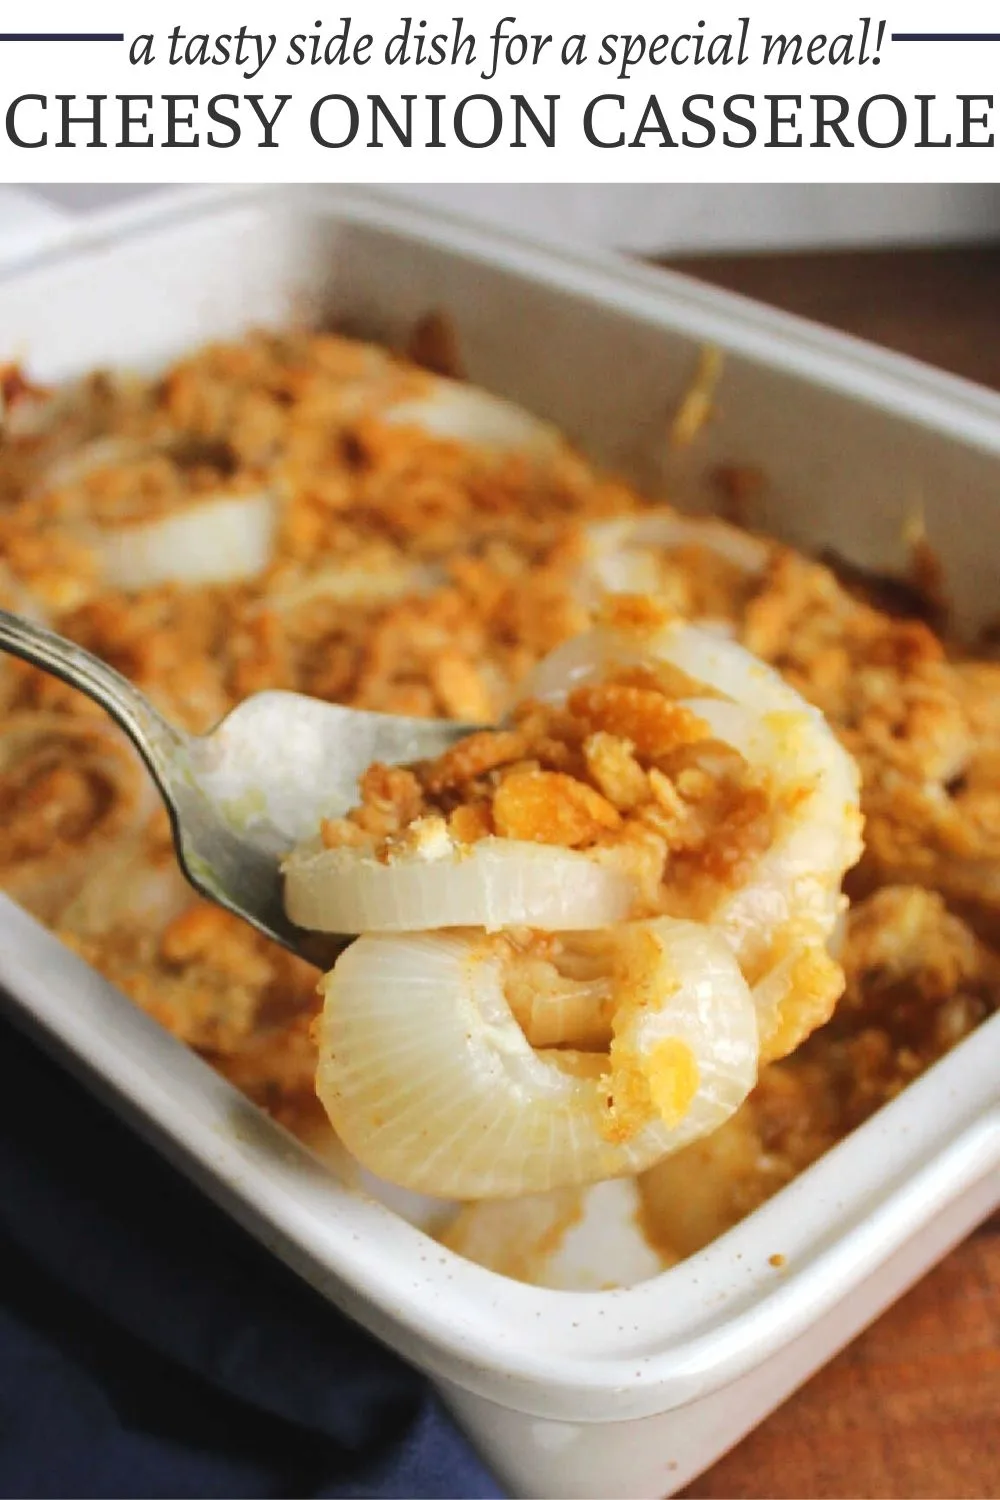 Sweet onions are the star of the show with this cheesy onion casserole. As the onions bake, they get soft and mild, making them the perfect base for herbs, cheese, and a buttery cracker topping.